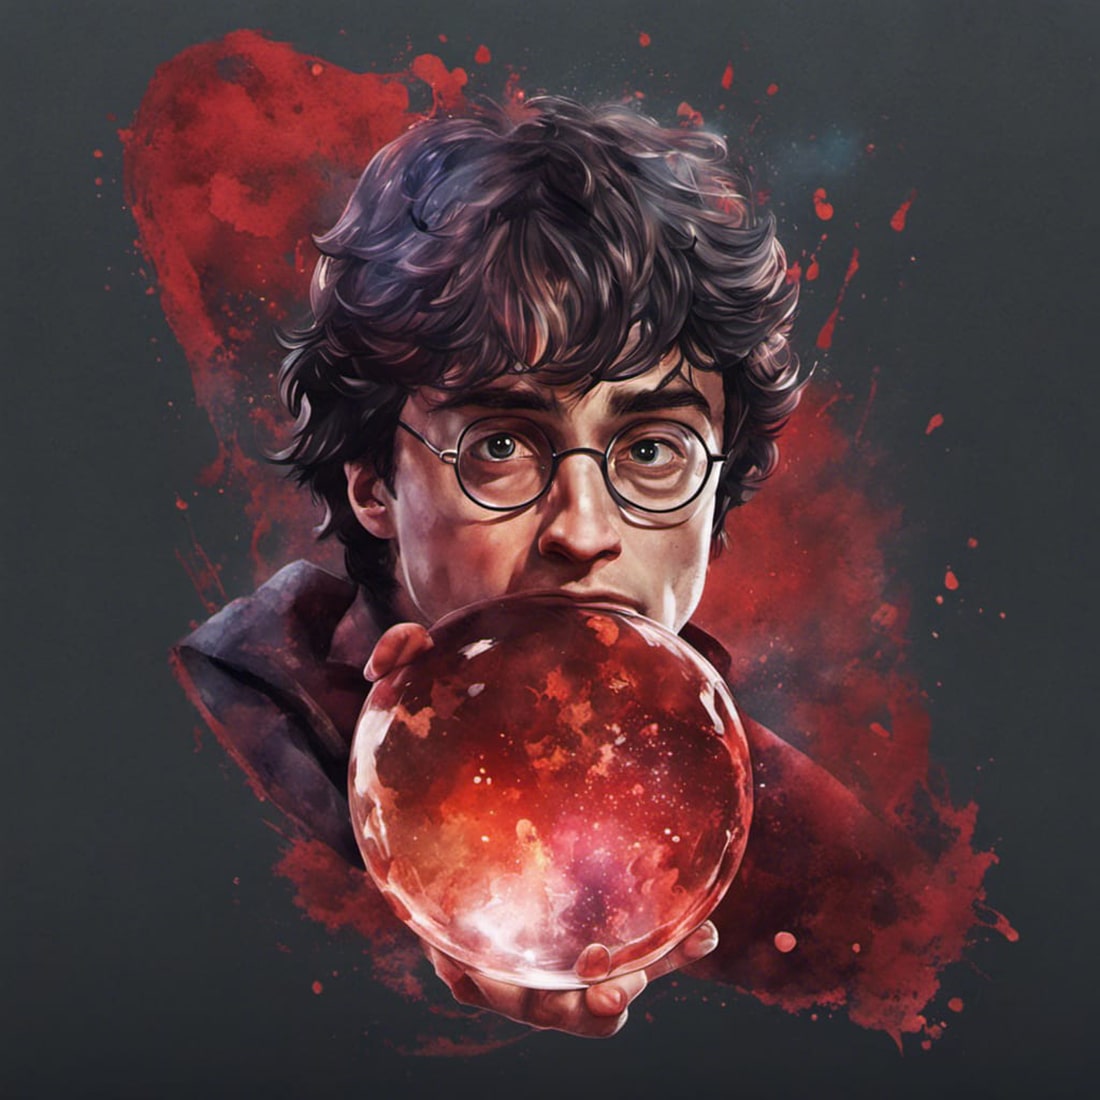 Harry potter casting a spell preview image.